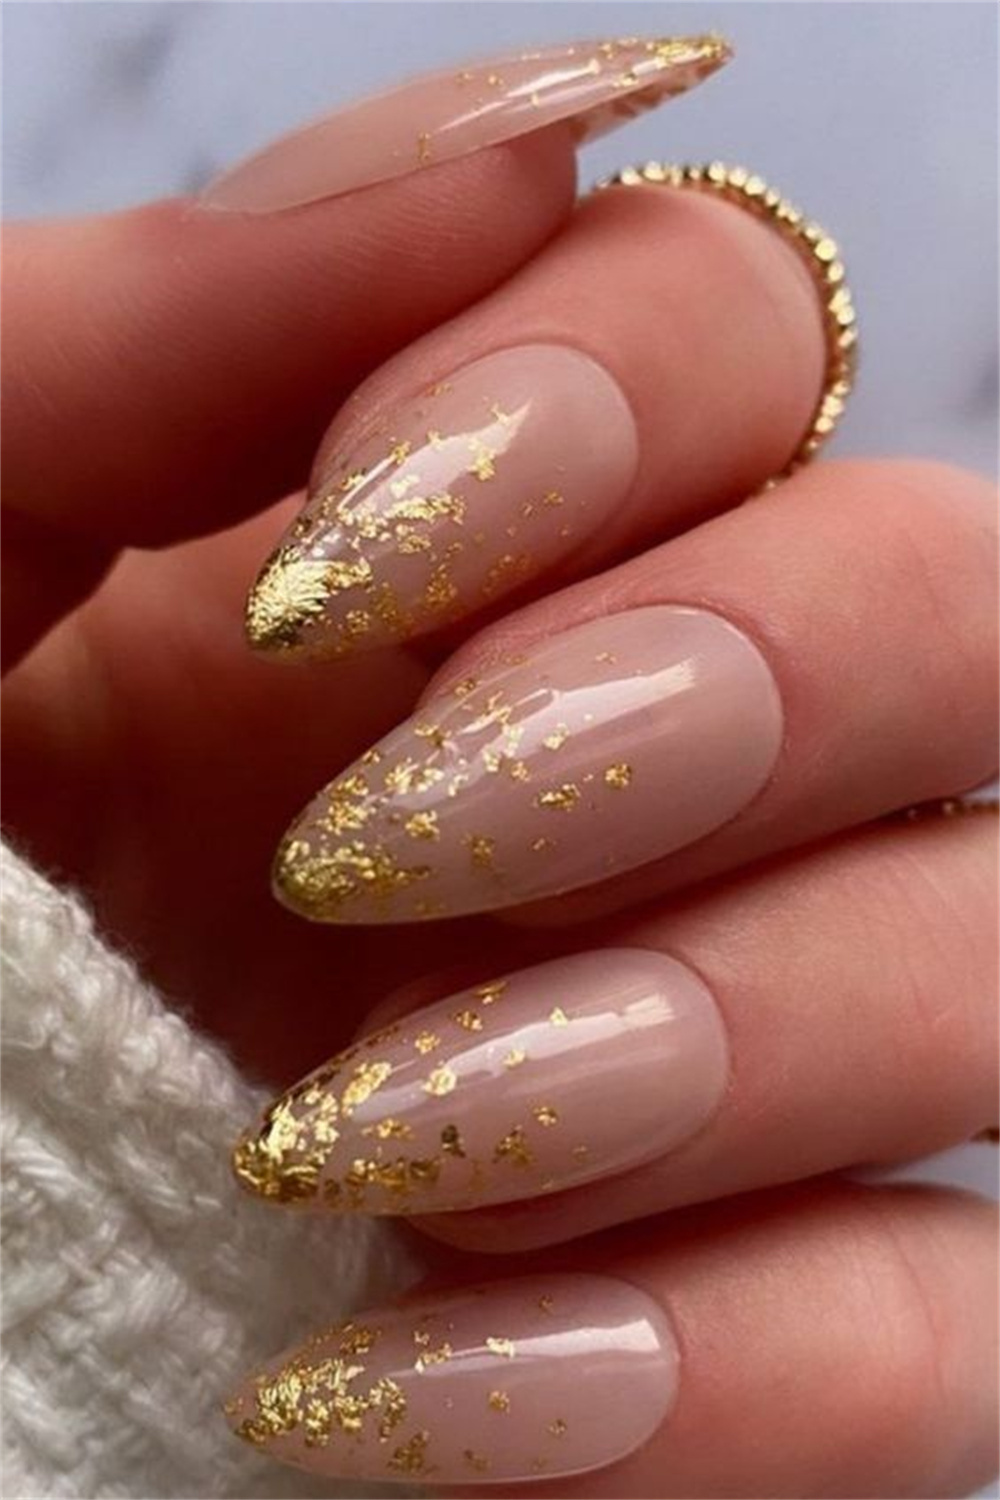 Christmas nails with gold foil accents